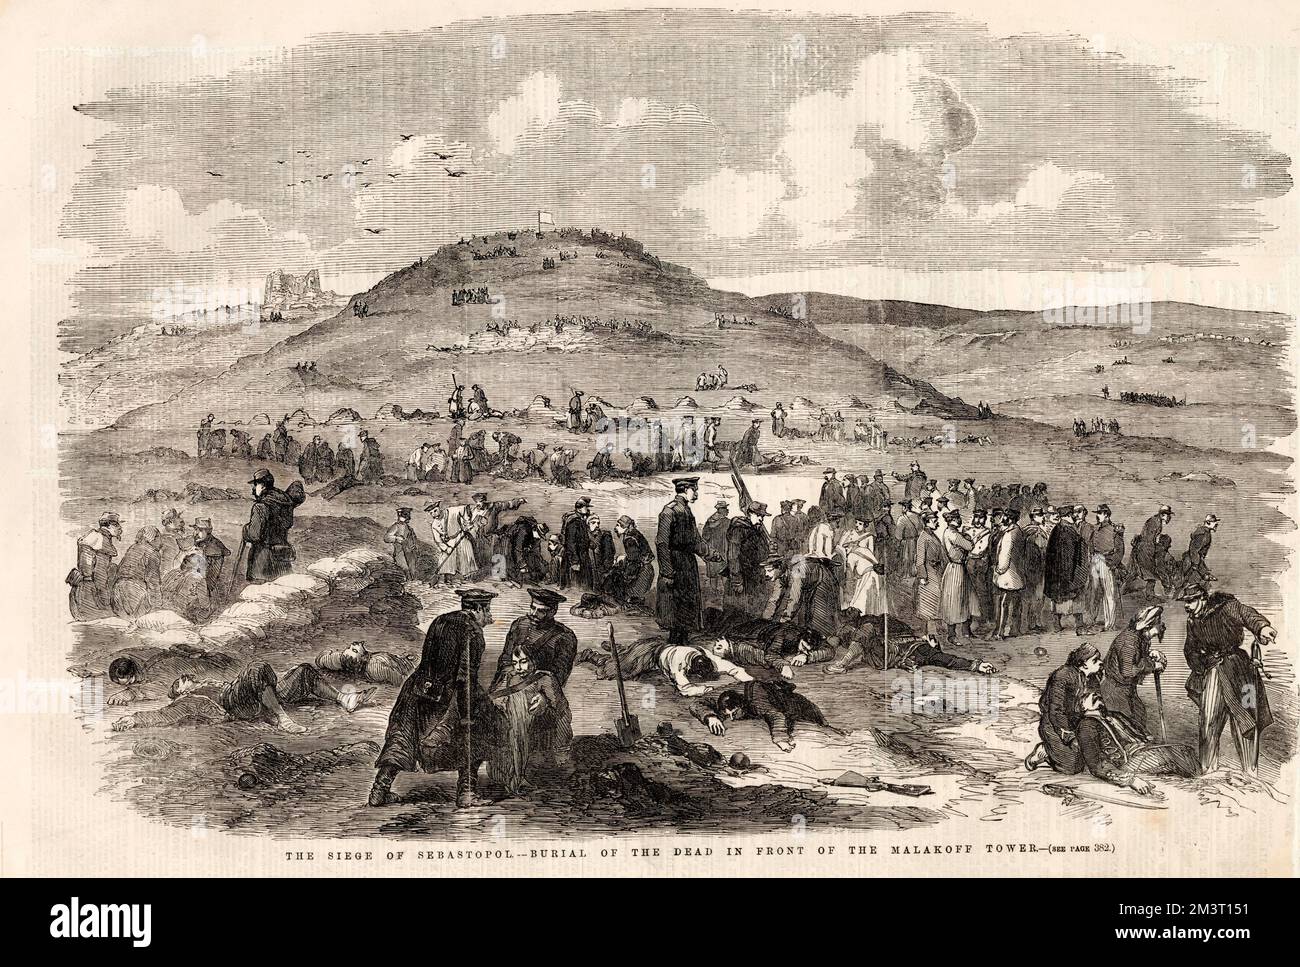 The Siege of Sebastopol - burial of the dead in front of the Malakoff Tower, Crimean War.  1855 Stock Photo